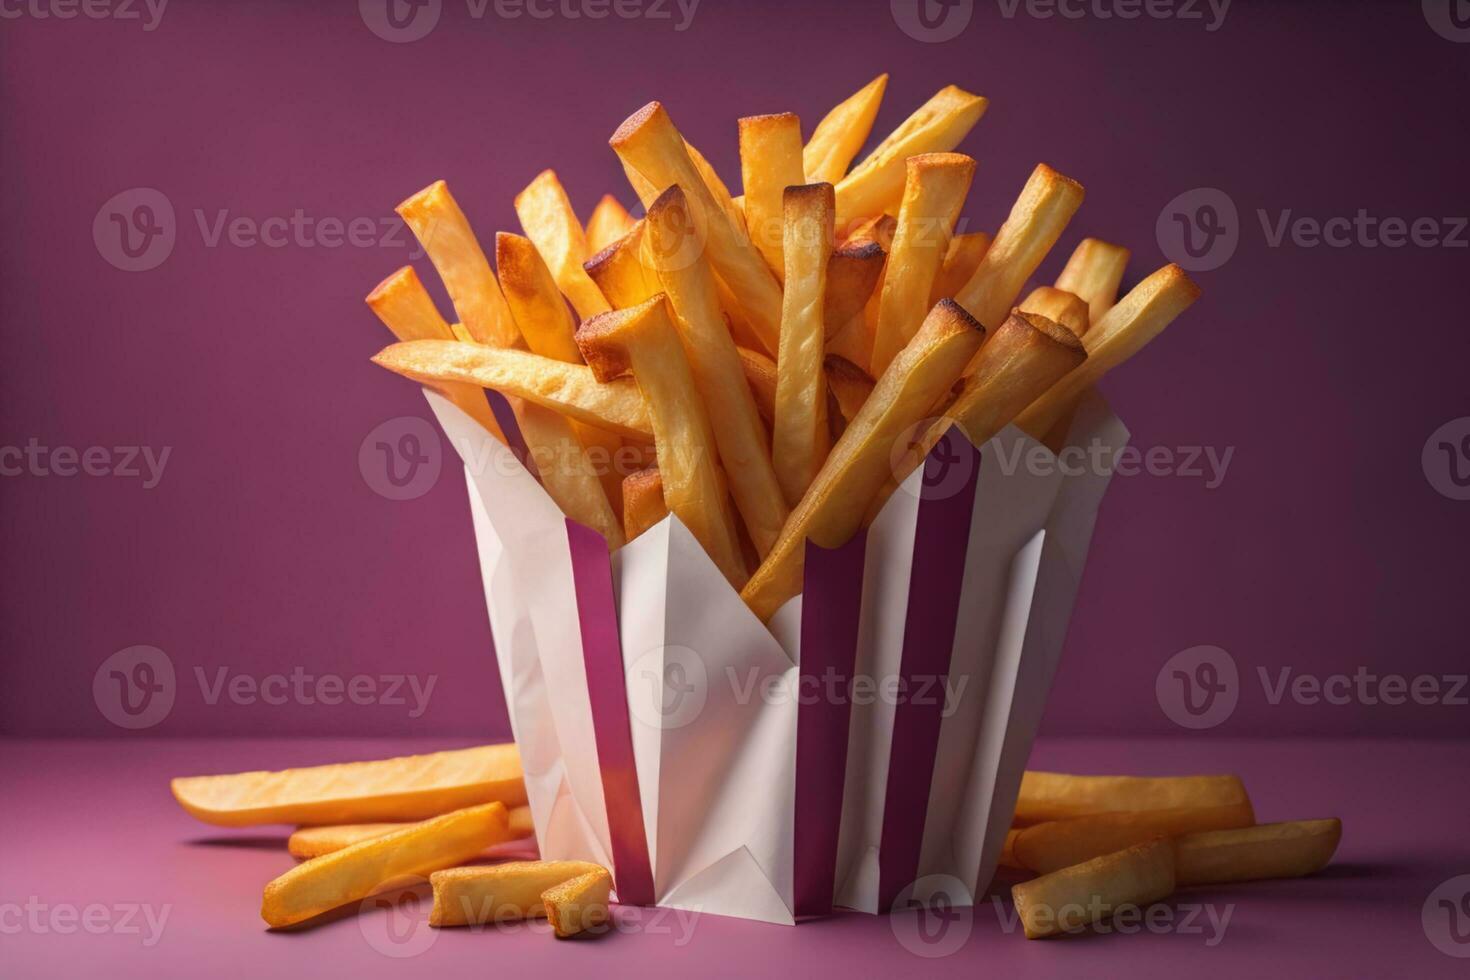 Appetizing french fries on the wooden table, close-up photo